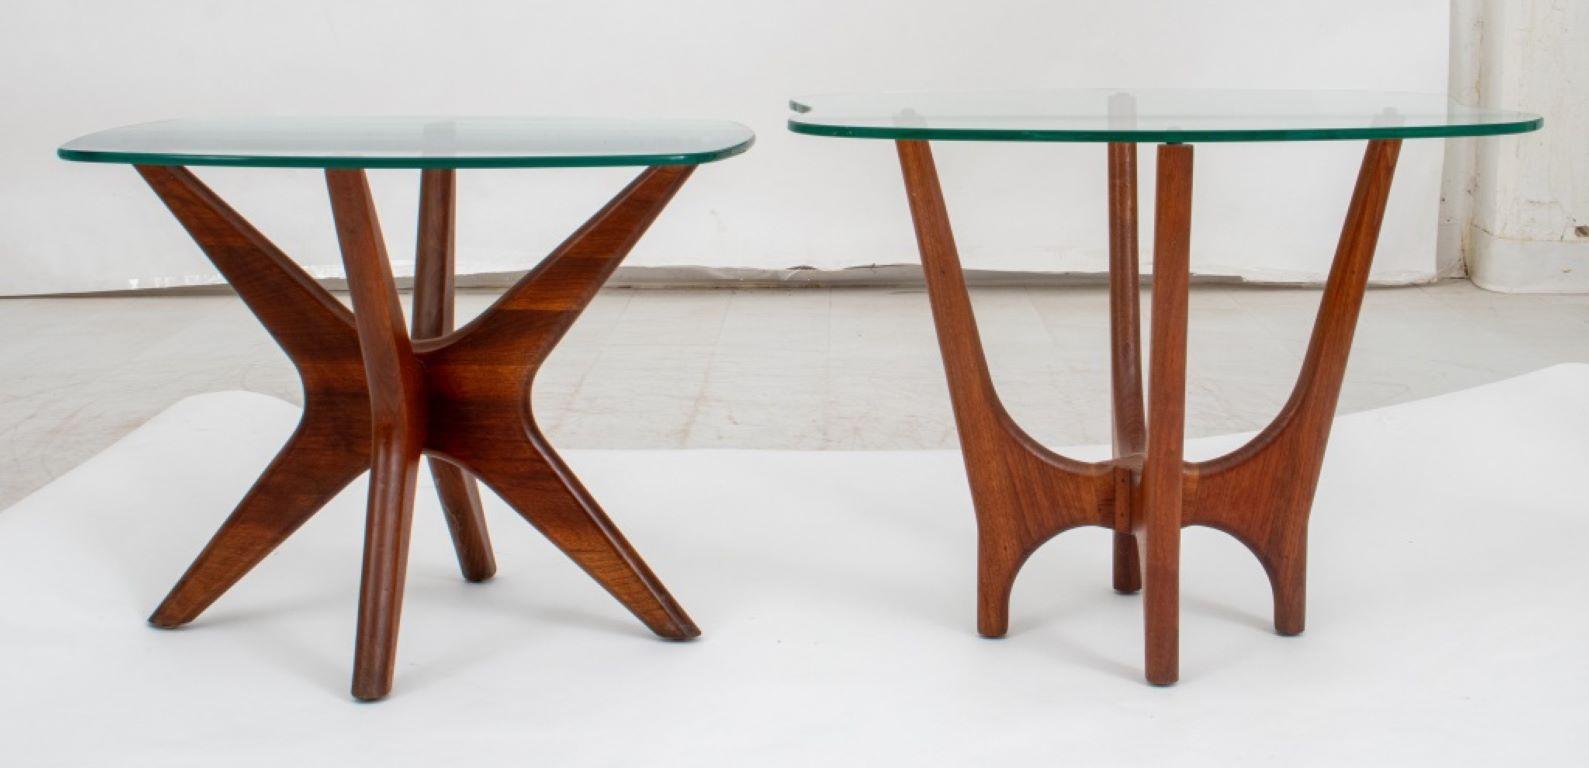 Assembled Pair of Adrian Pearsall Mid-Century Modern End Tables, glass tops with walnut bases. Provenance: From a Riverside Drive collection.